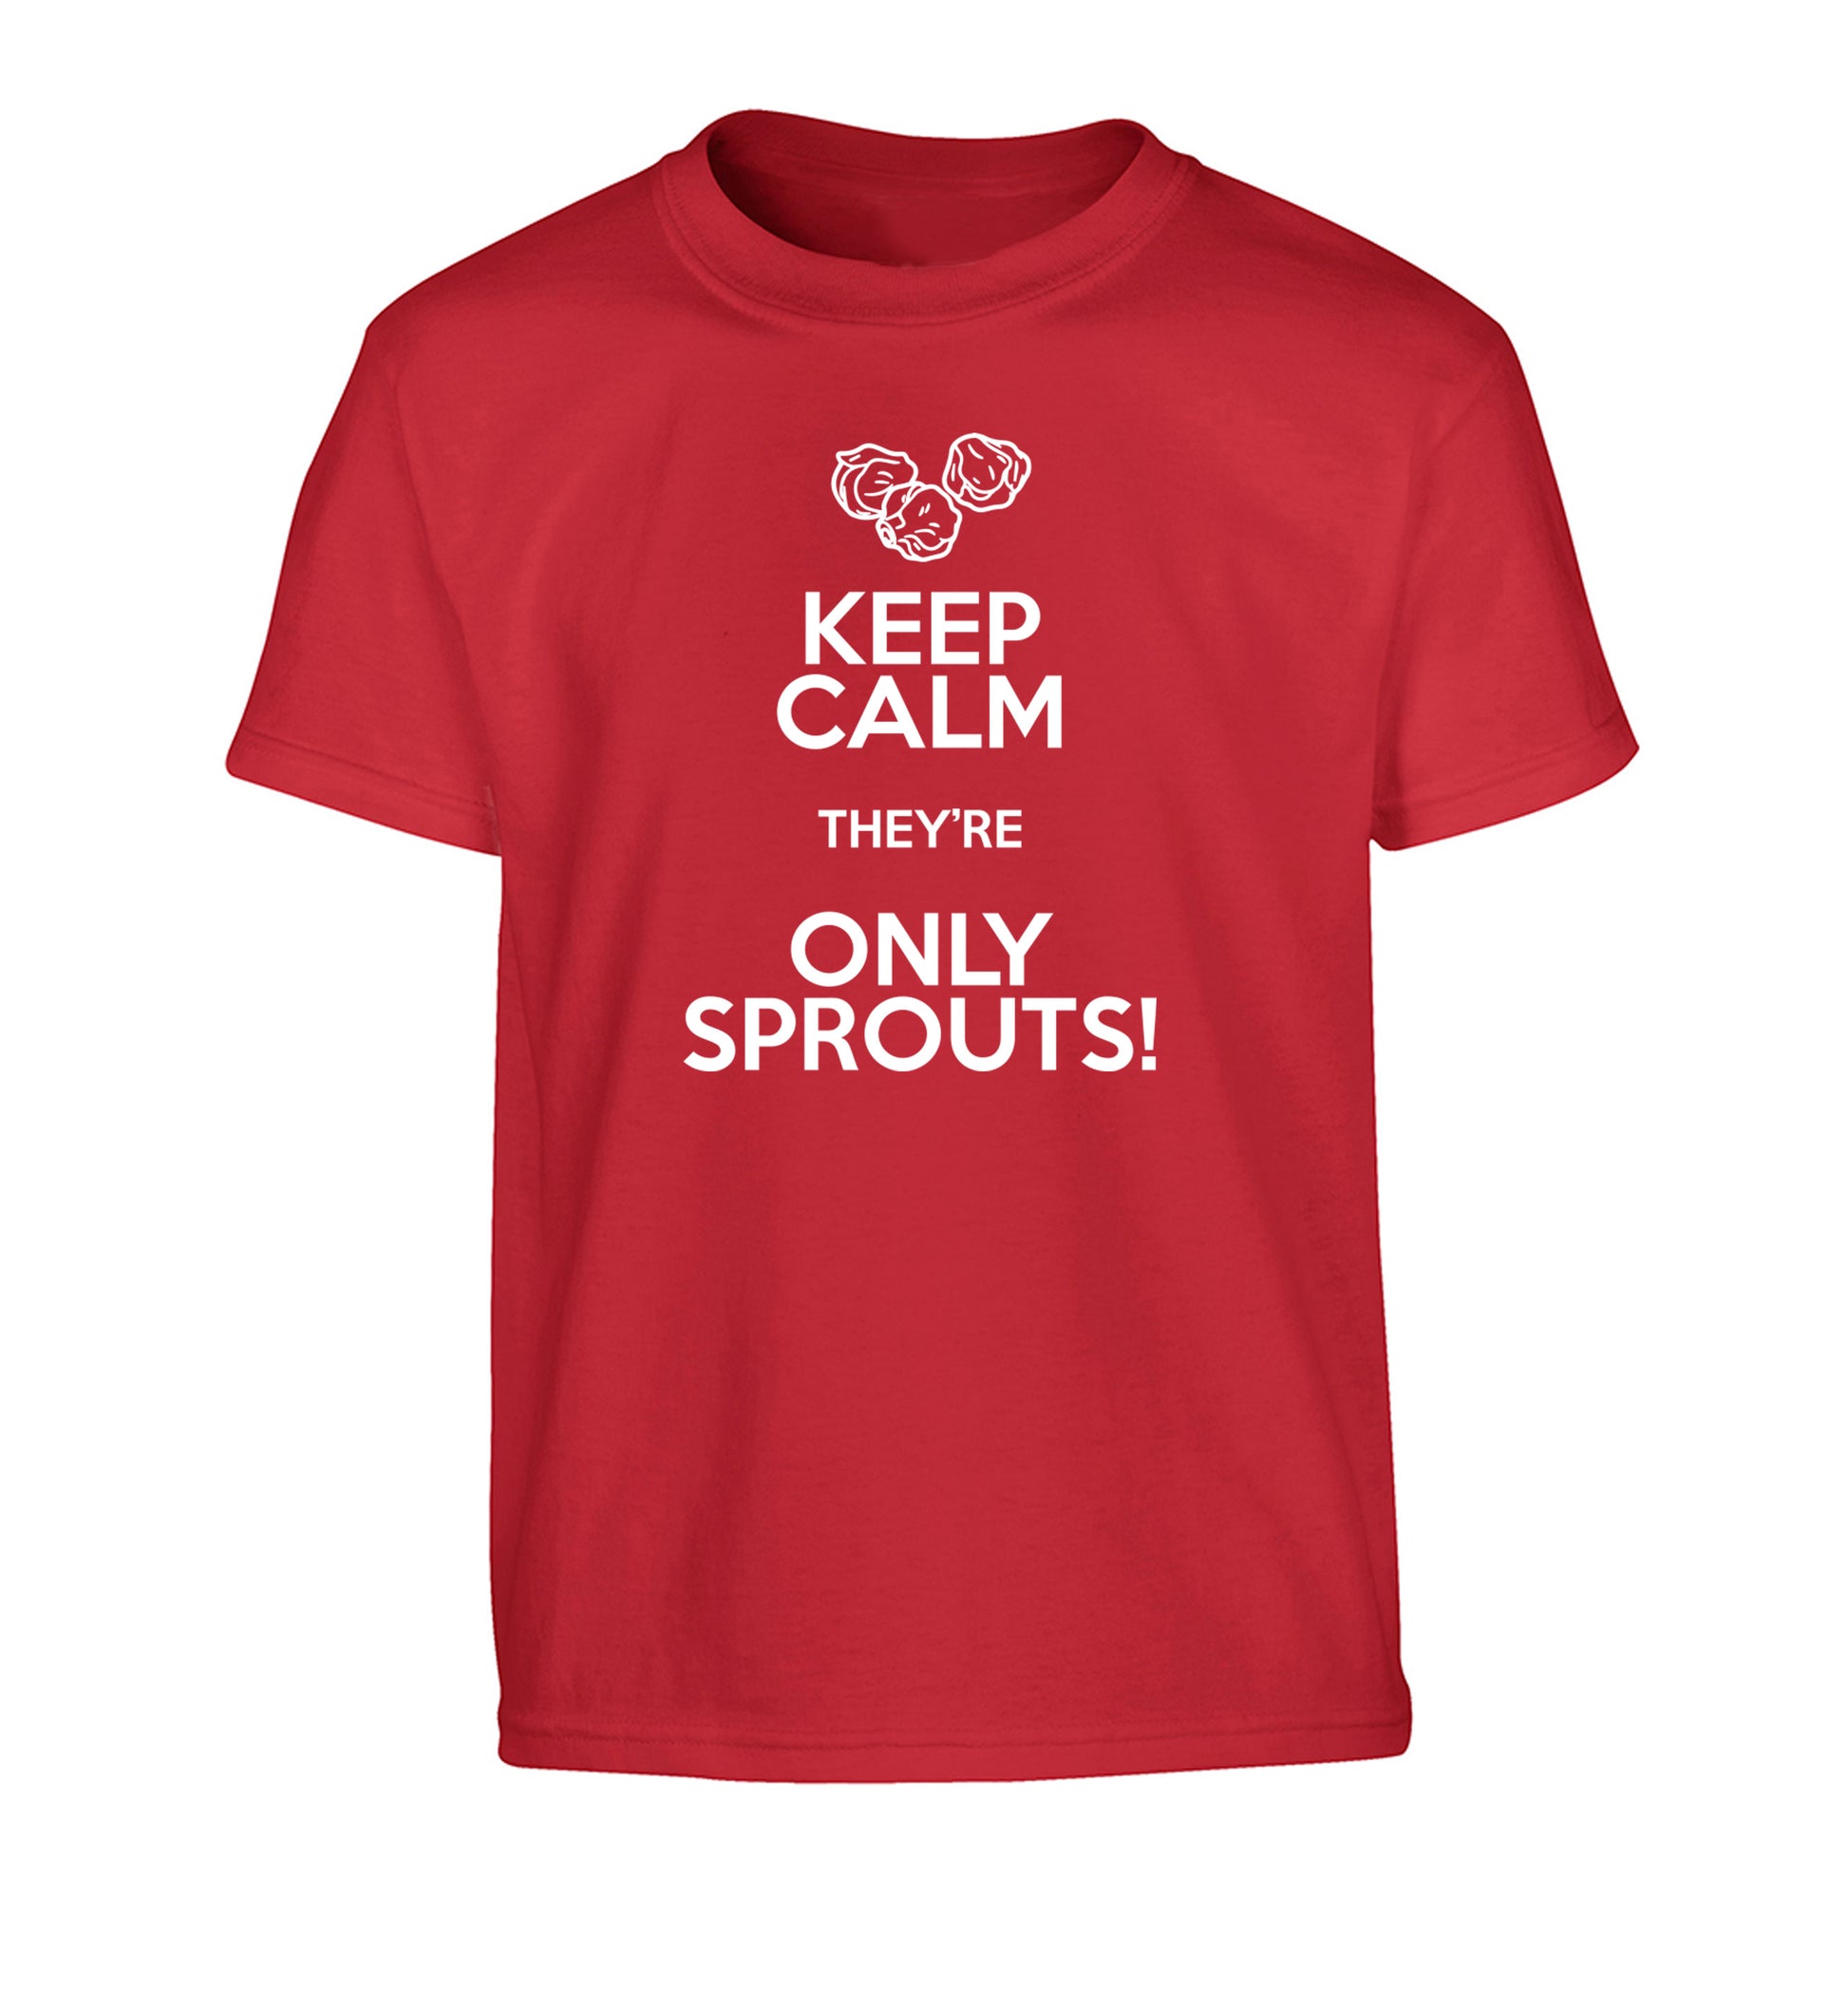 Keep calm they're only sprouts Children's red Tshirt 12-13 Years